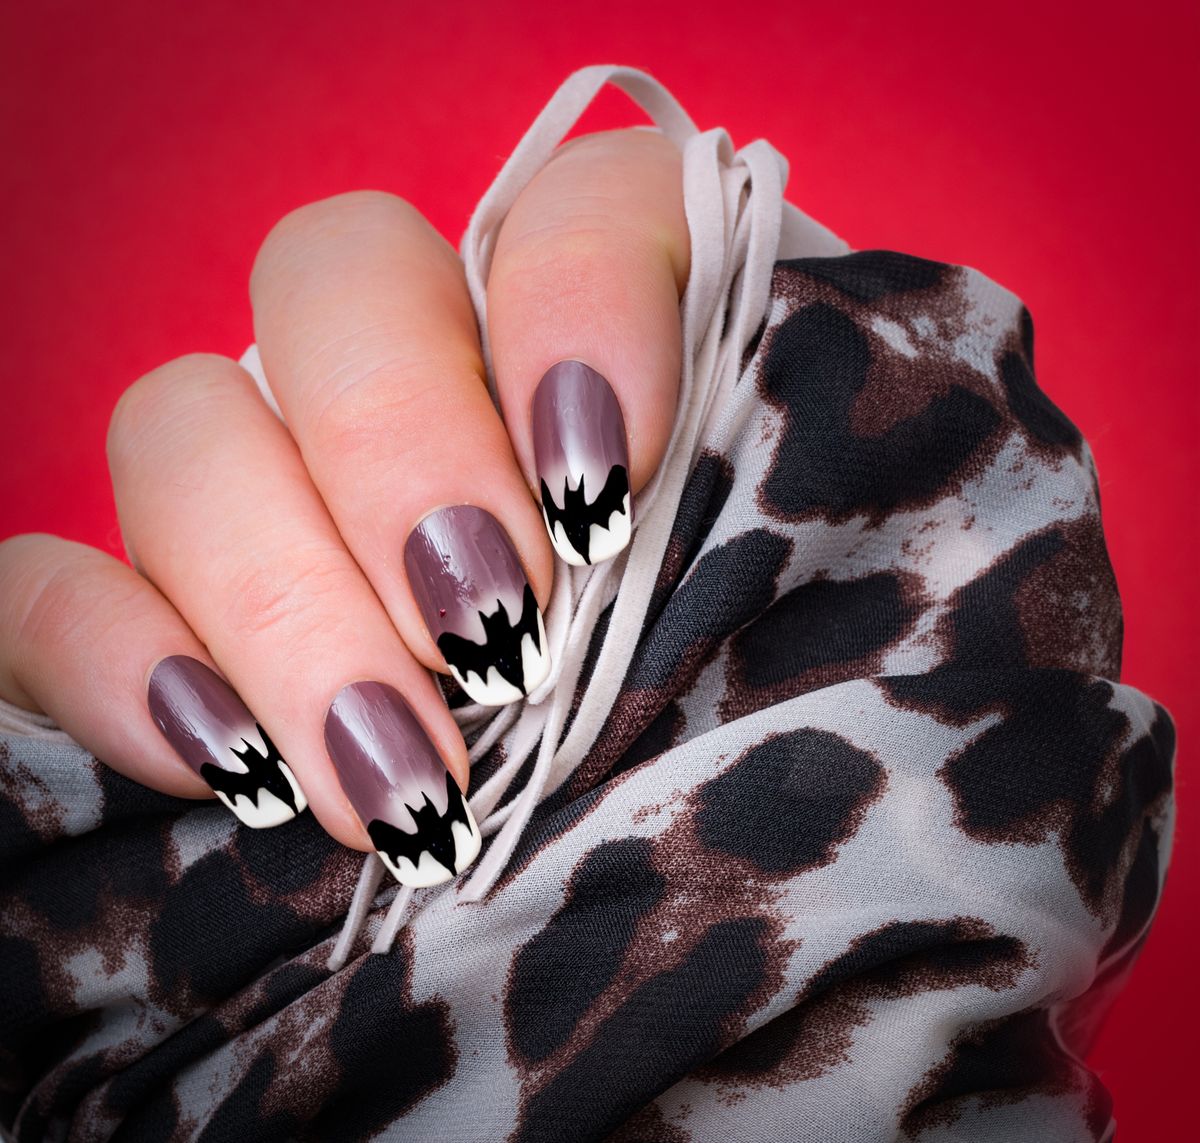 Turn Heads With These Halloween Nail Art Ideas